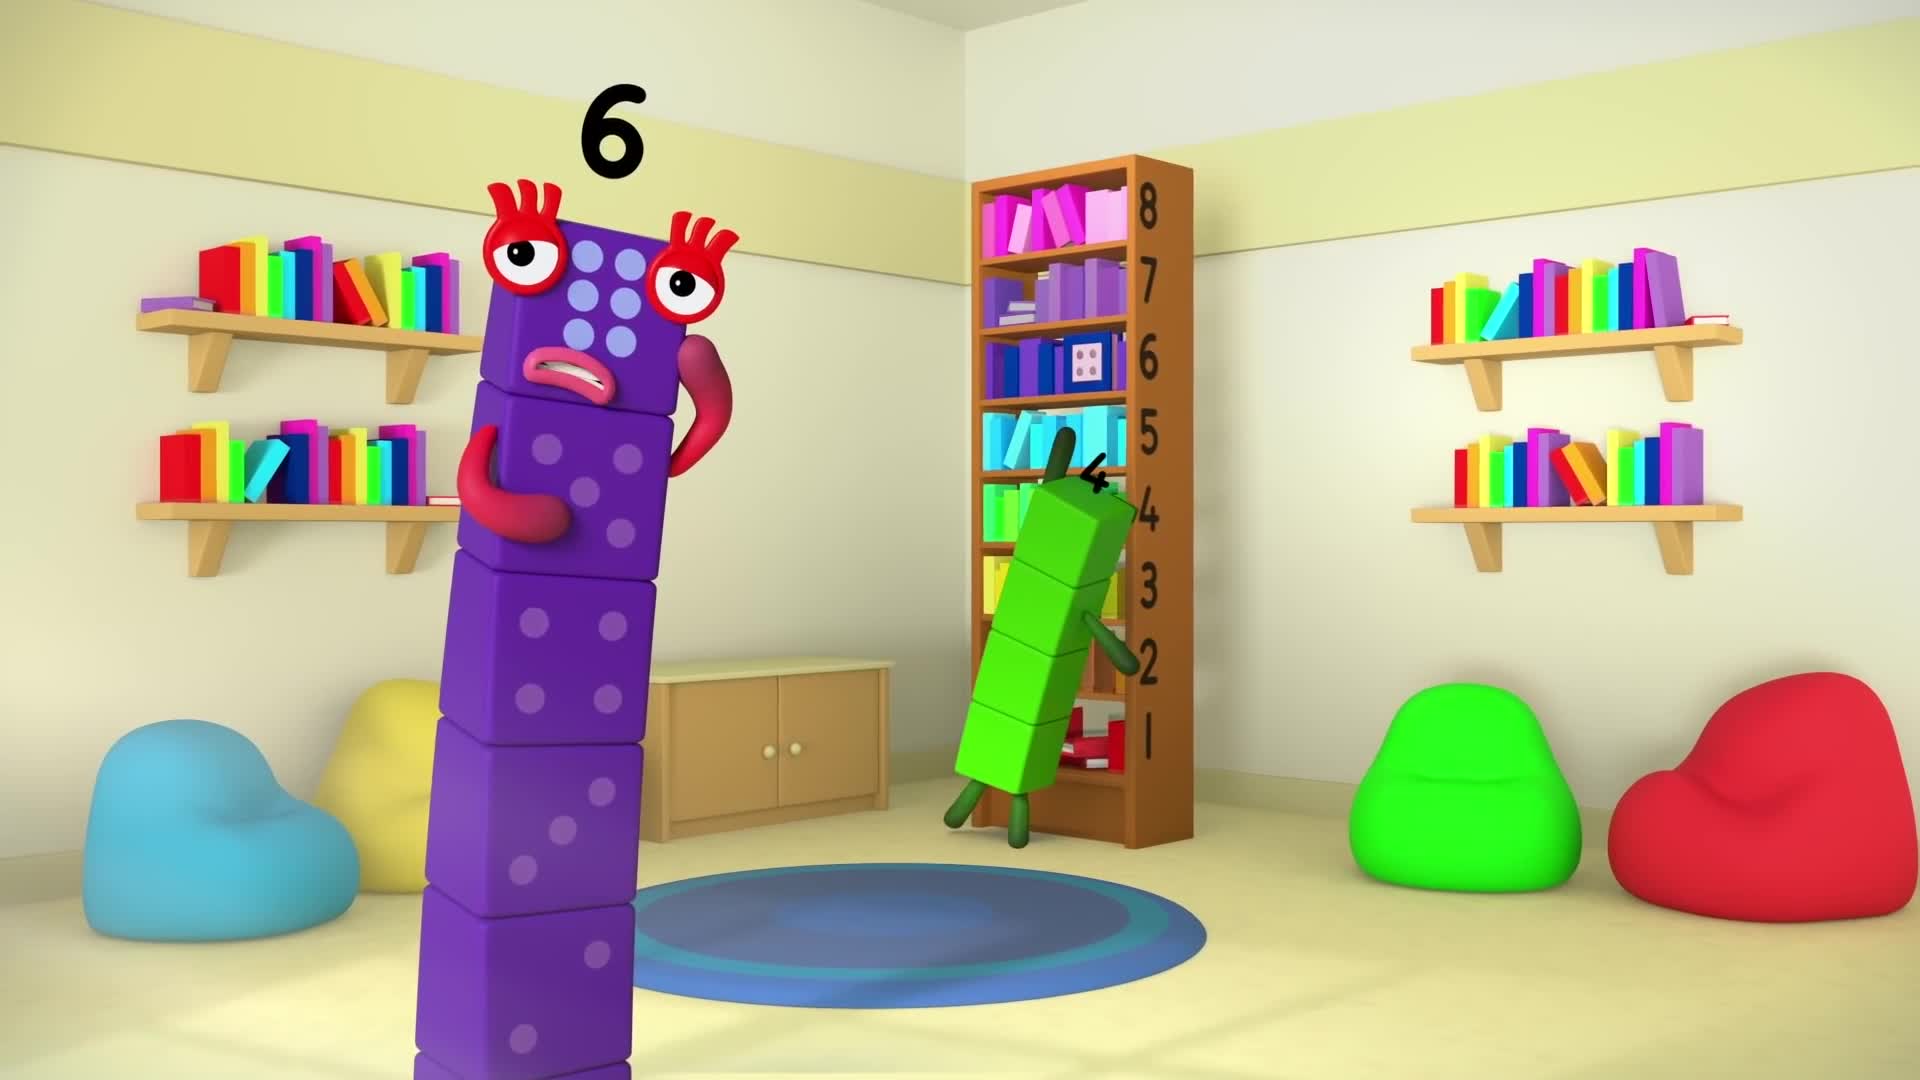 Numberblocks - Can You Find All the Eggs? - Happy Easter! - Learn to Count